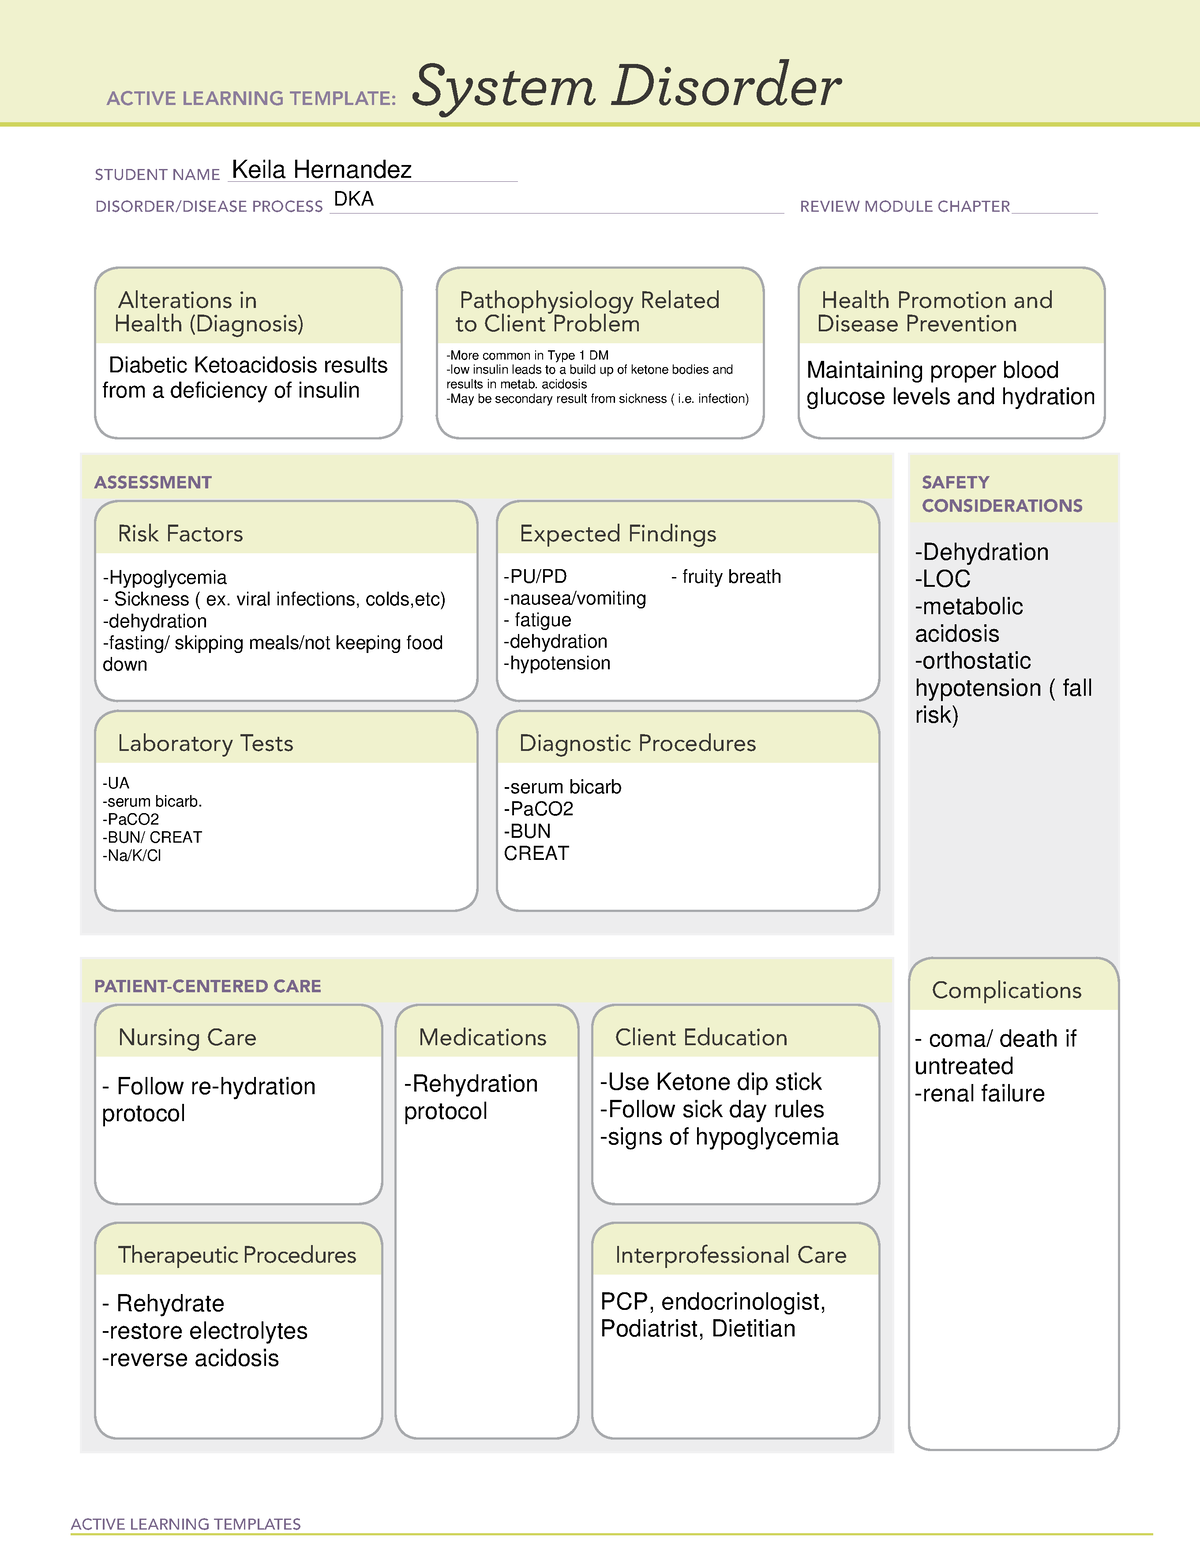 ati-active-learning-template-system-dka-active-learning-templates